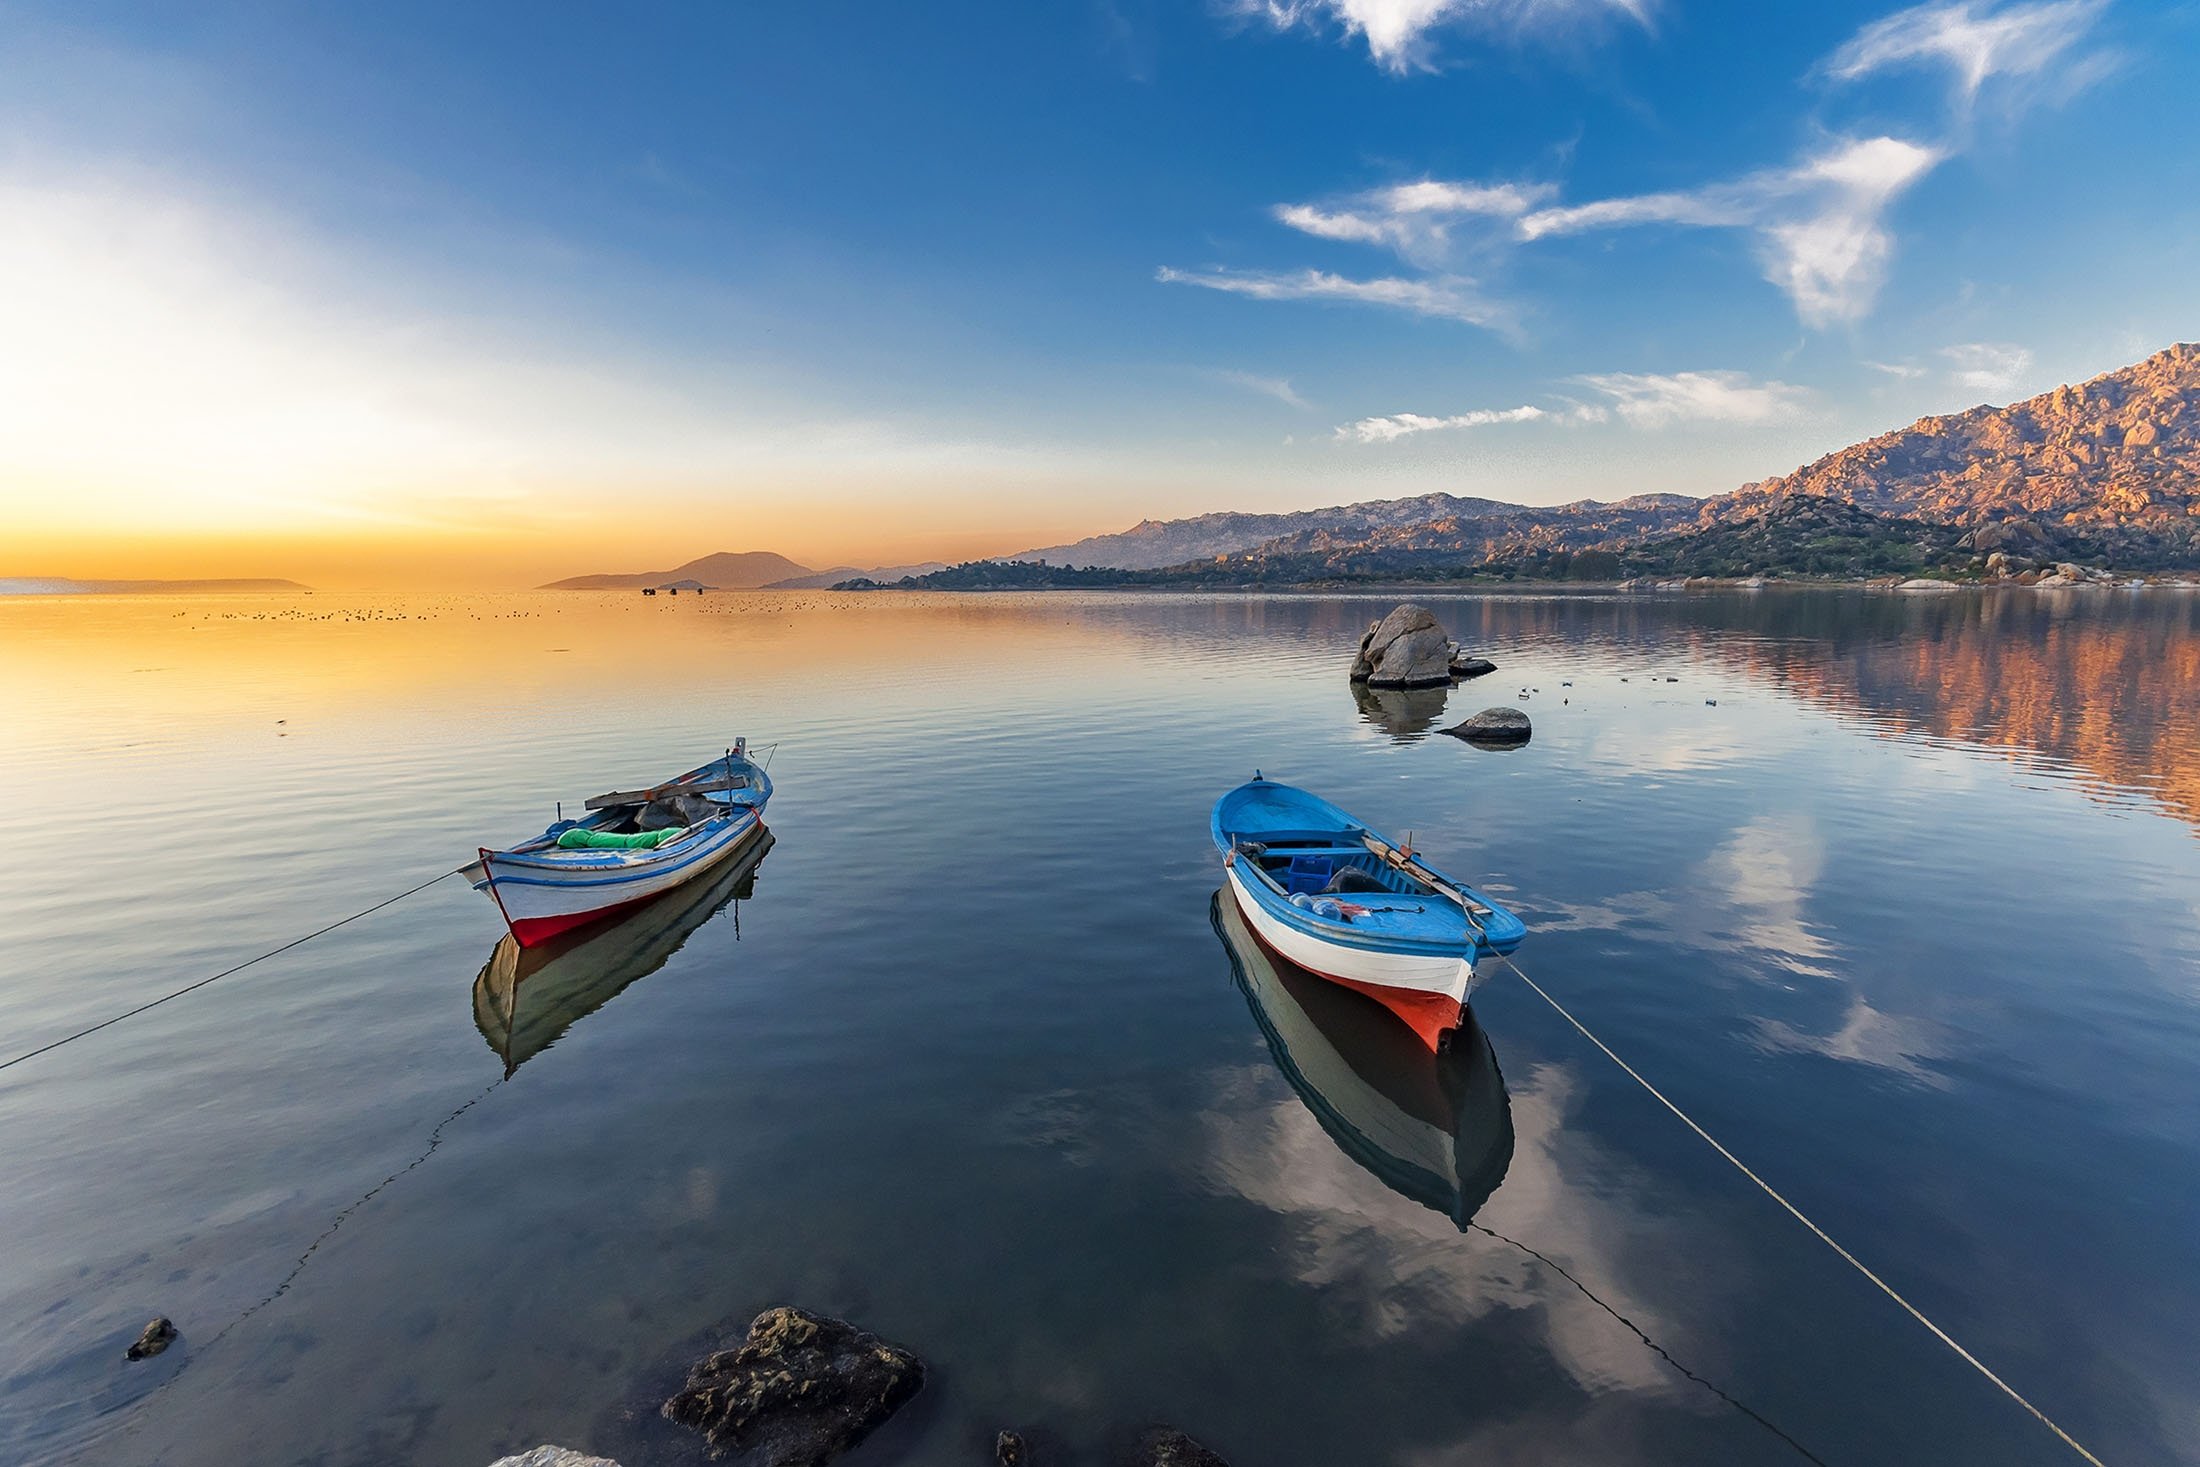 Located near Milas in Muğla and visible from the main highway, Lake Bafa is a sublime slice of nature with tropical looks and the plants and birds that adorn it.  (Photo Shutterstock)